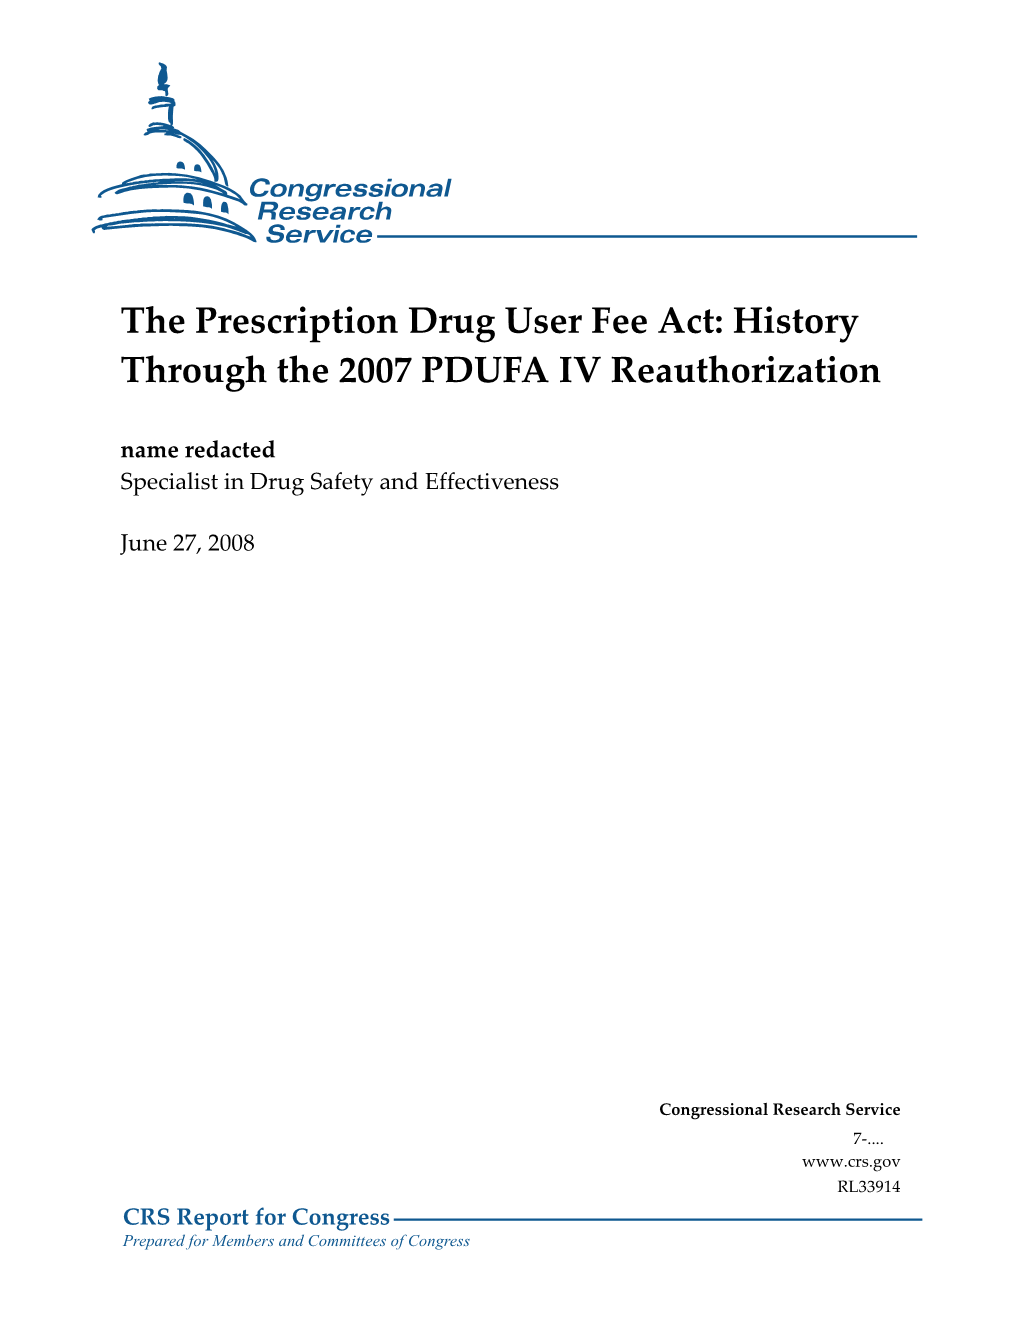 The Prescription Drug User Fee Act: History Through the 2007 PDUFA IV Reauthorization Name Redacted Specialist in Drug Safety and Effectiveness